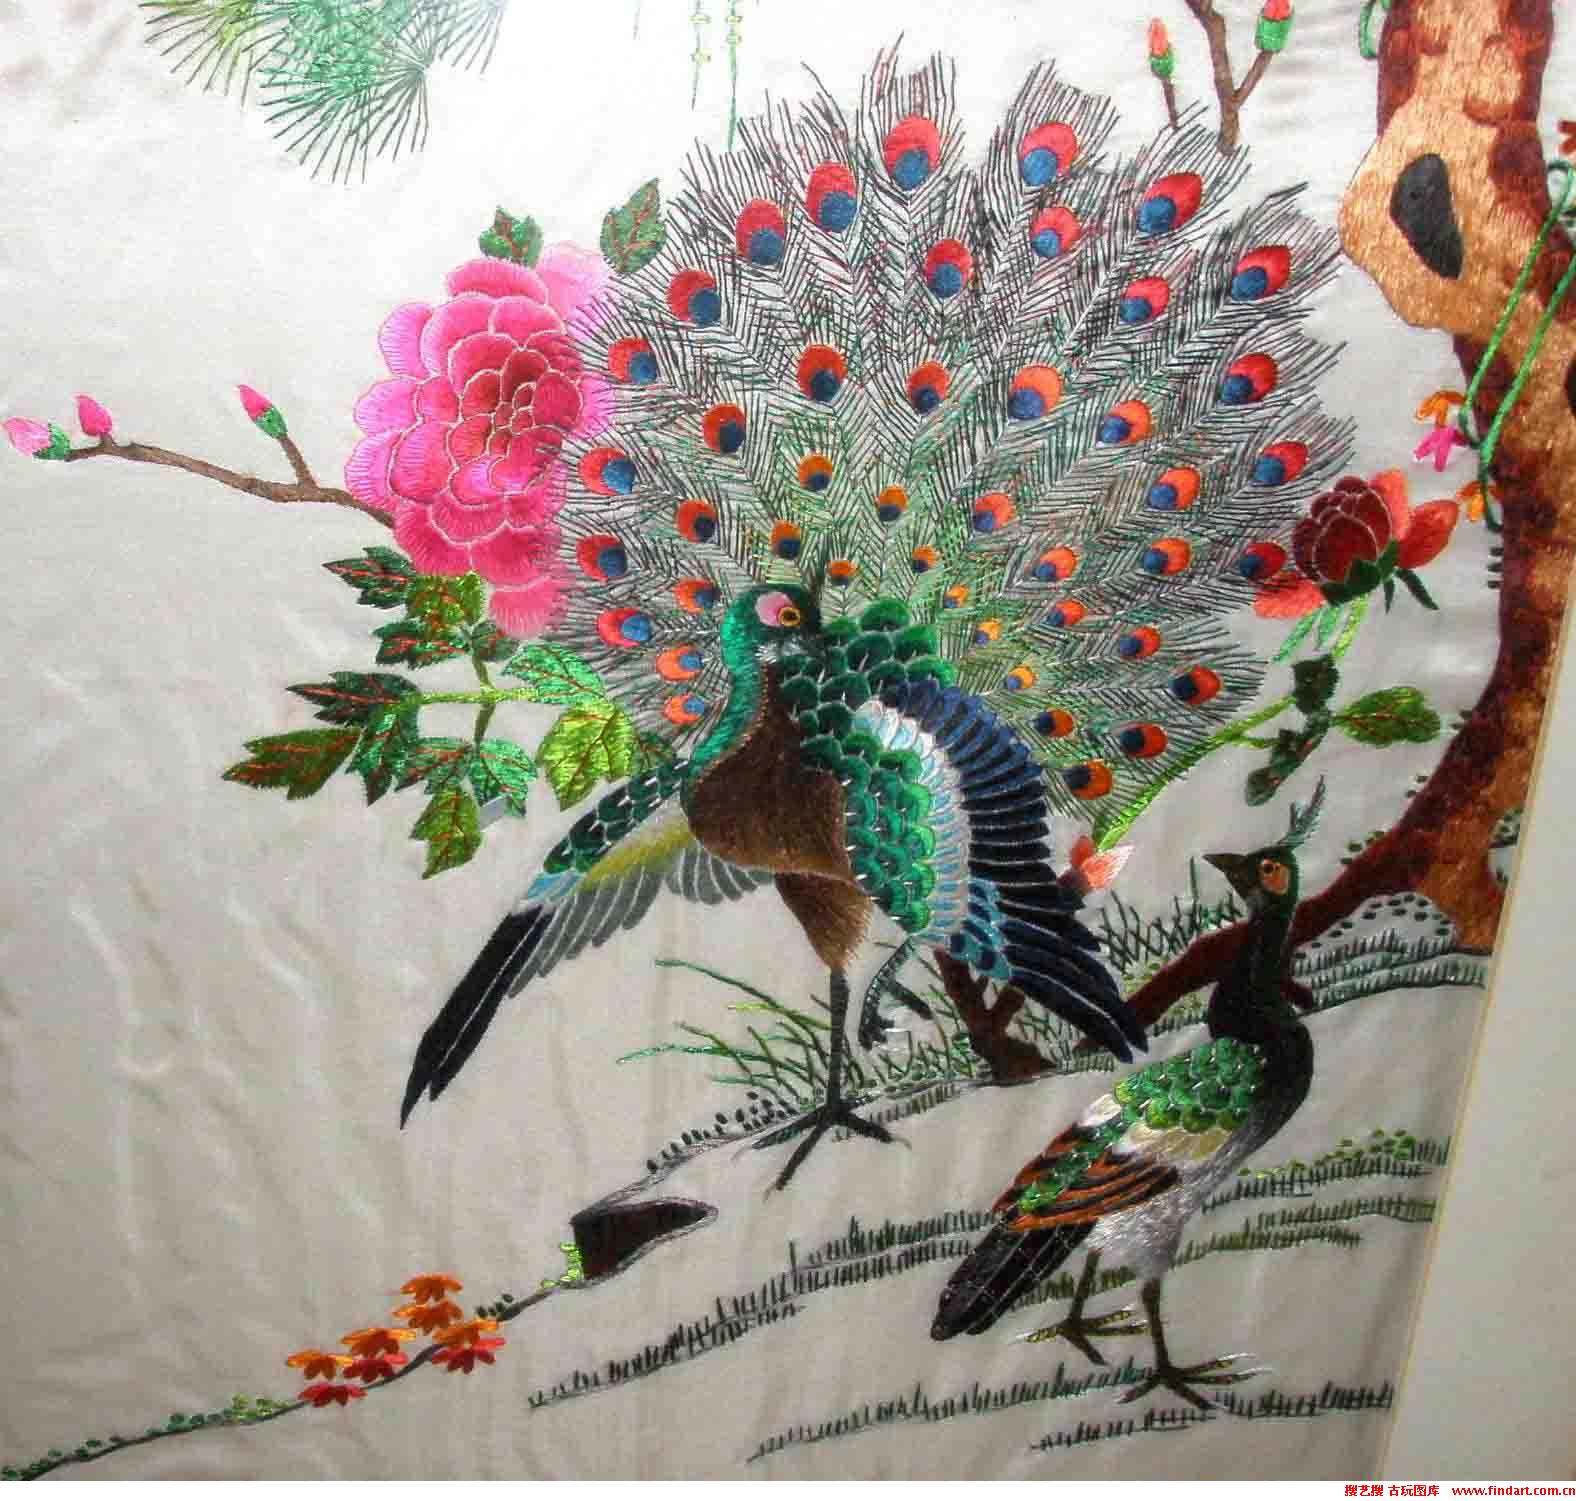 Yue(Guangdong)Embroidery - http://www.easytourchina.com/tour-v213-11 ...